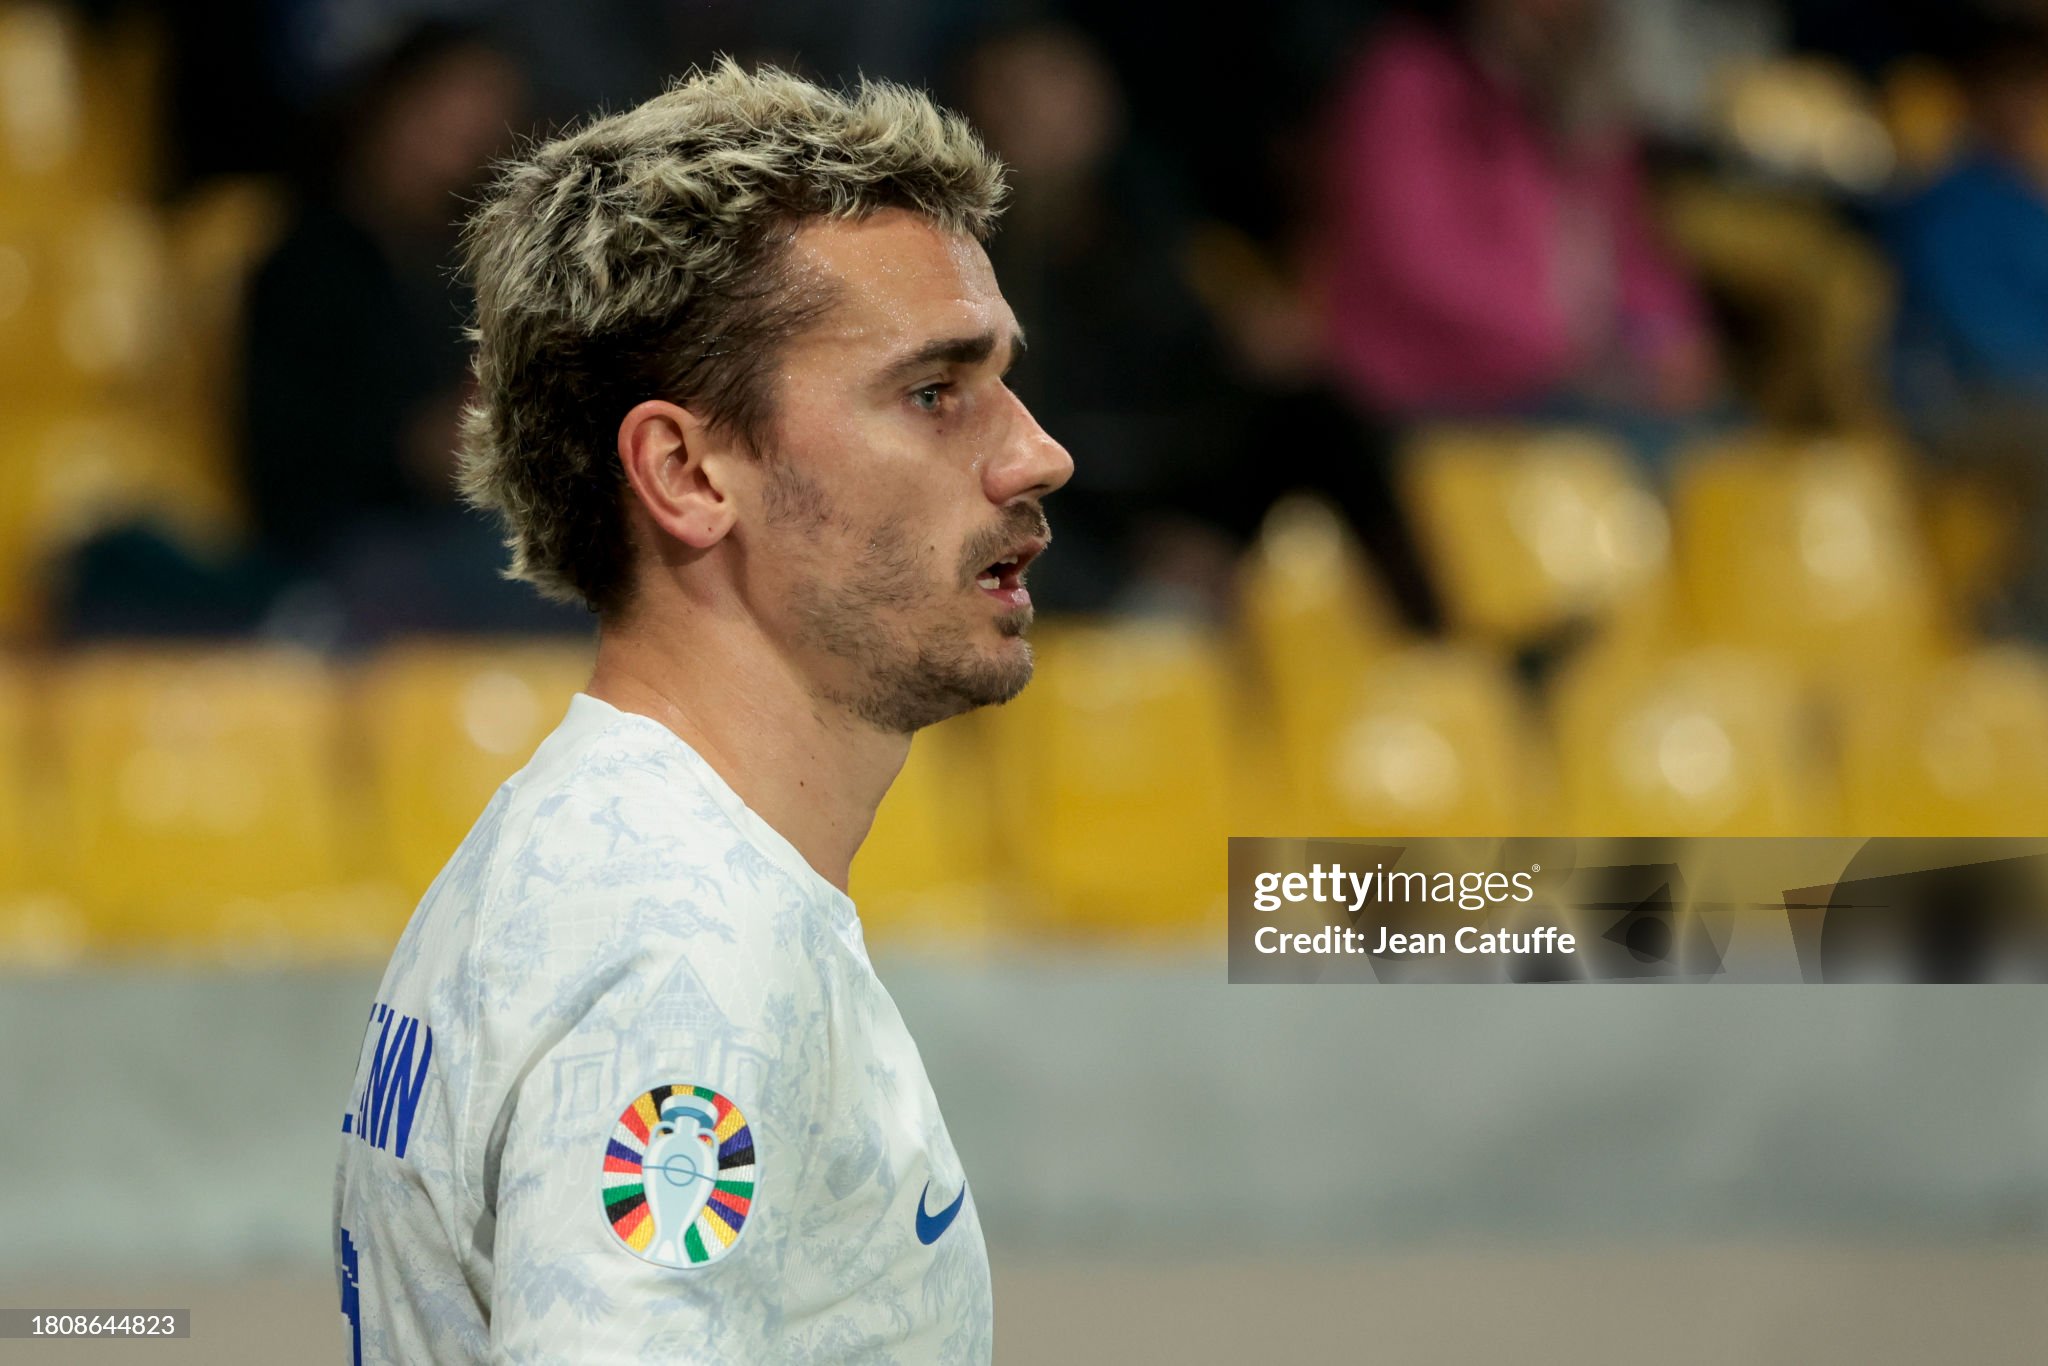 Griezmann nears age-old record: 'I want to become a club icon'